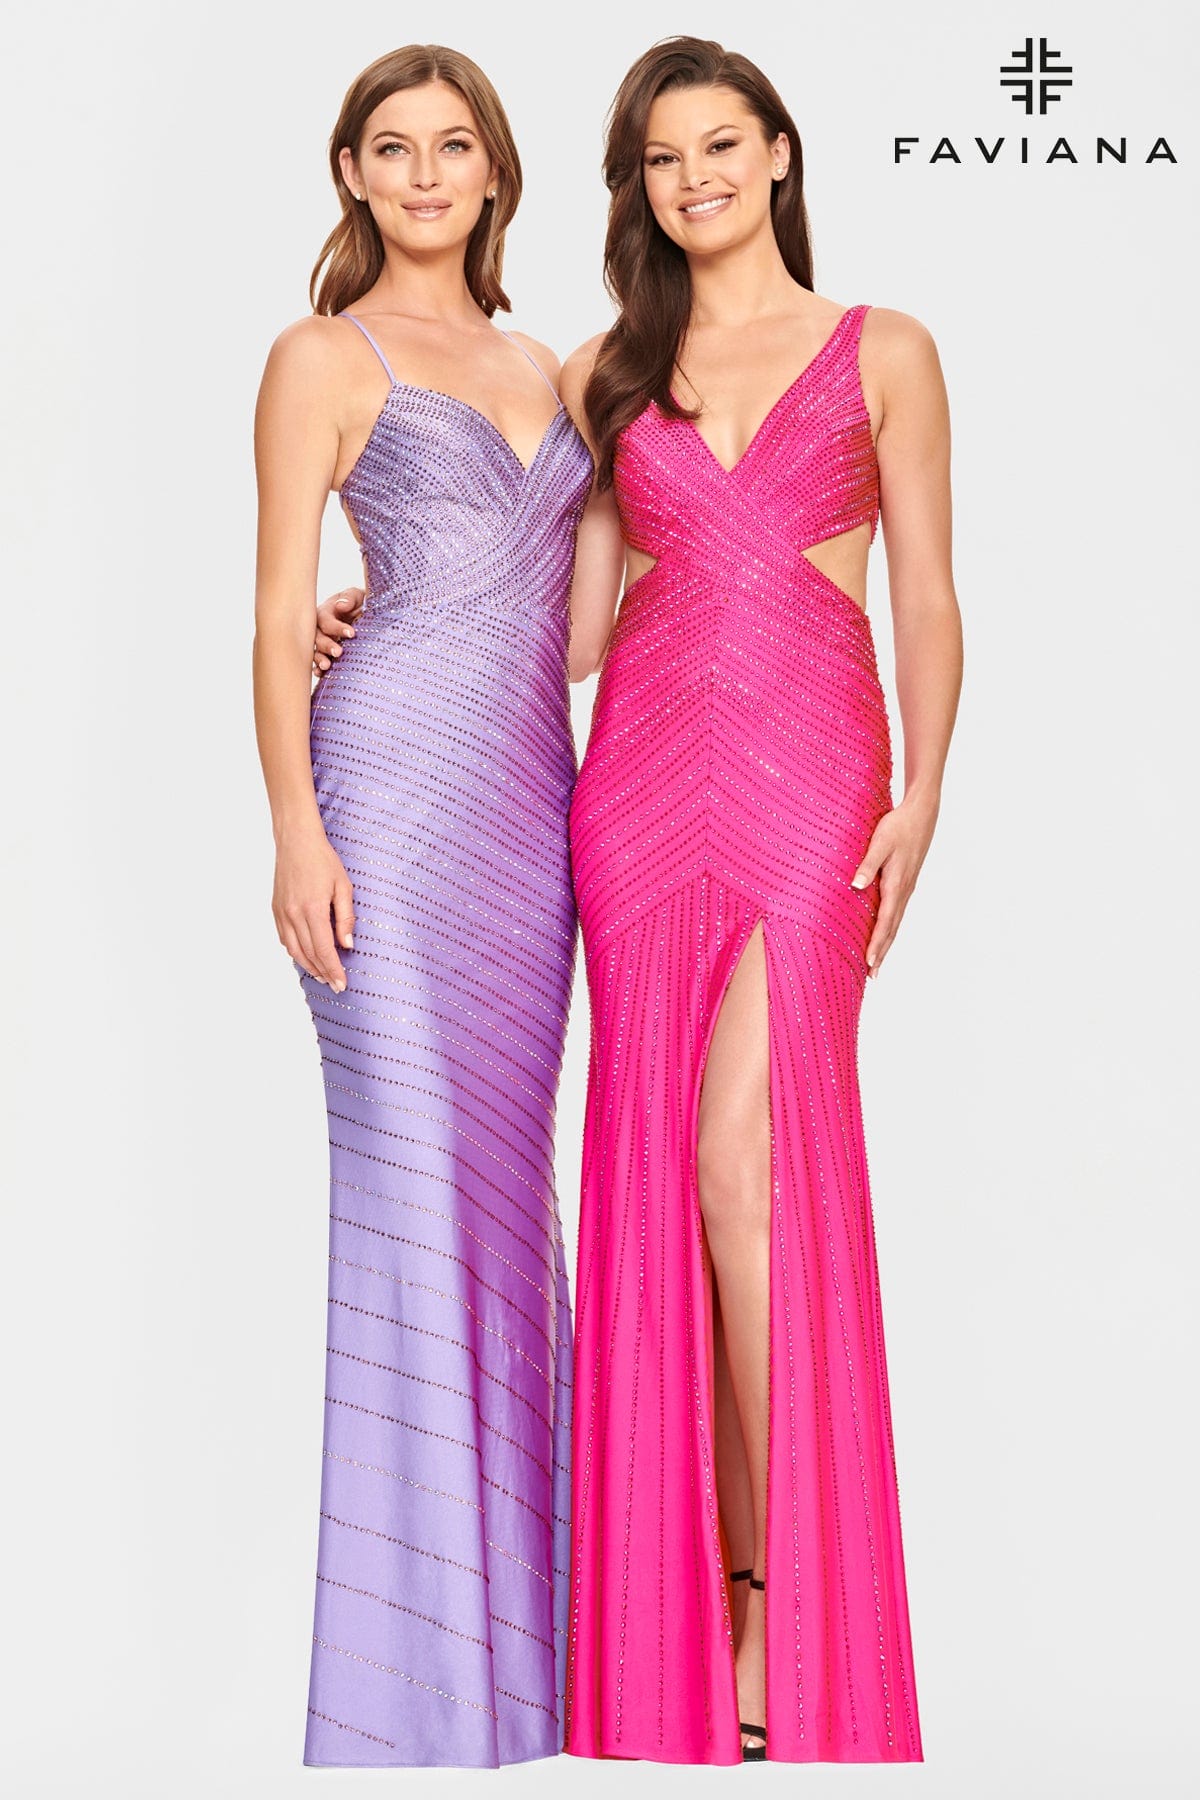 V Neck Prom Dress With Patterned Beading And Side Cutouts